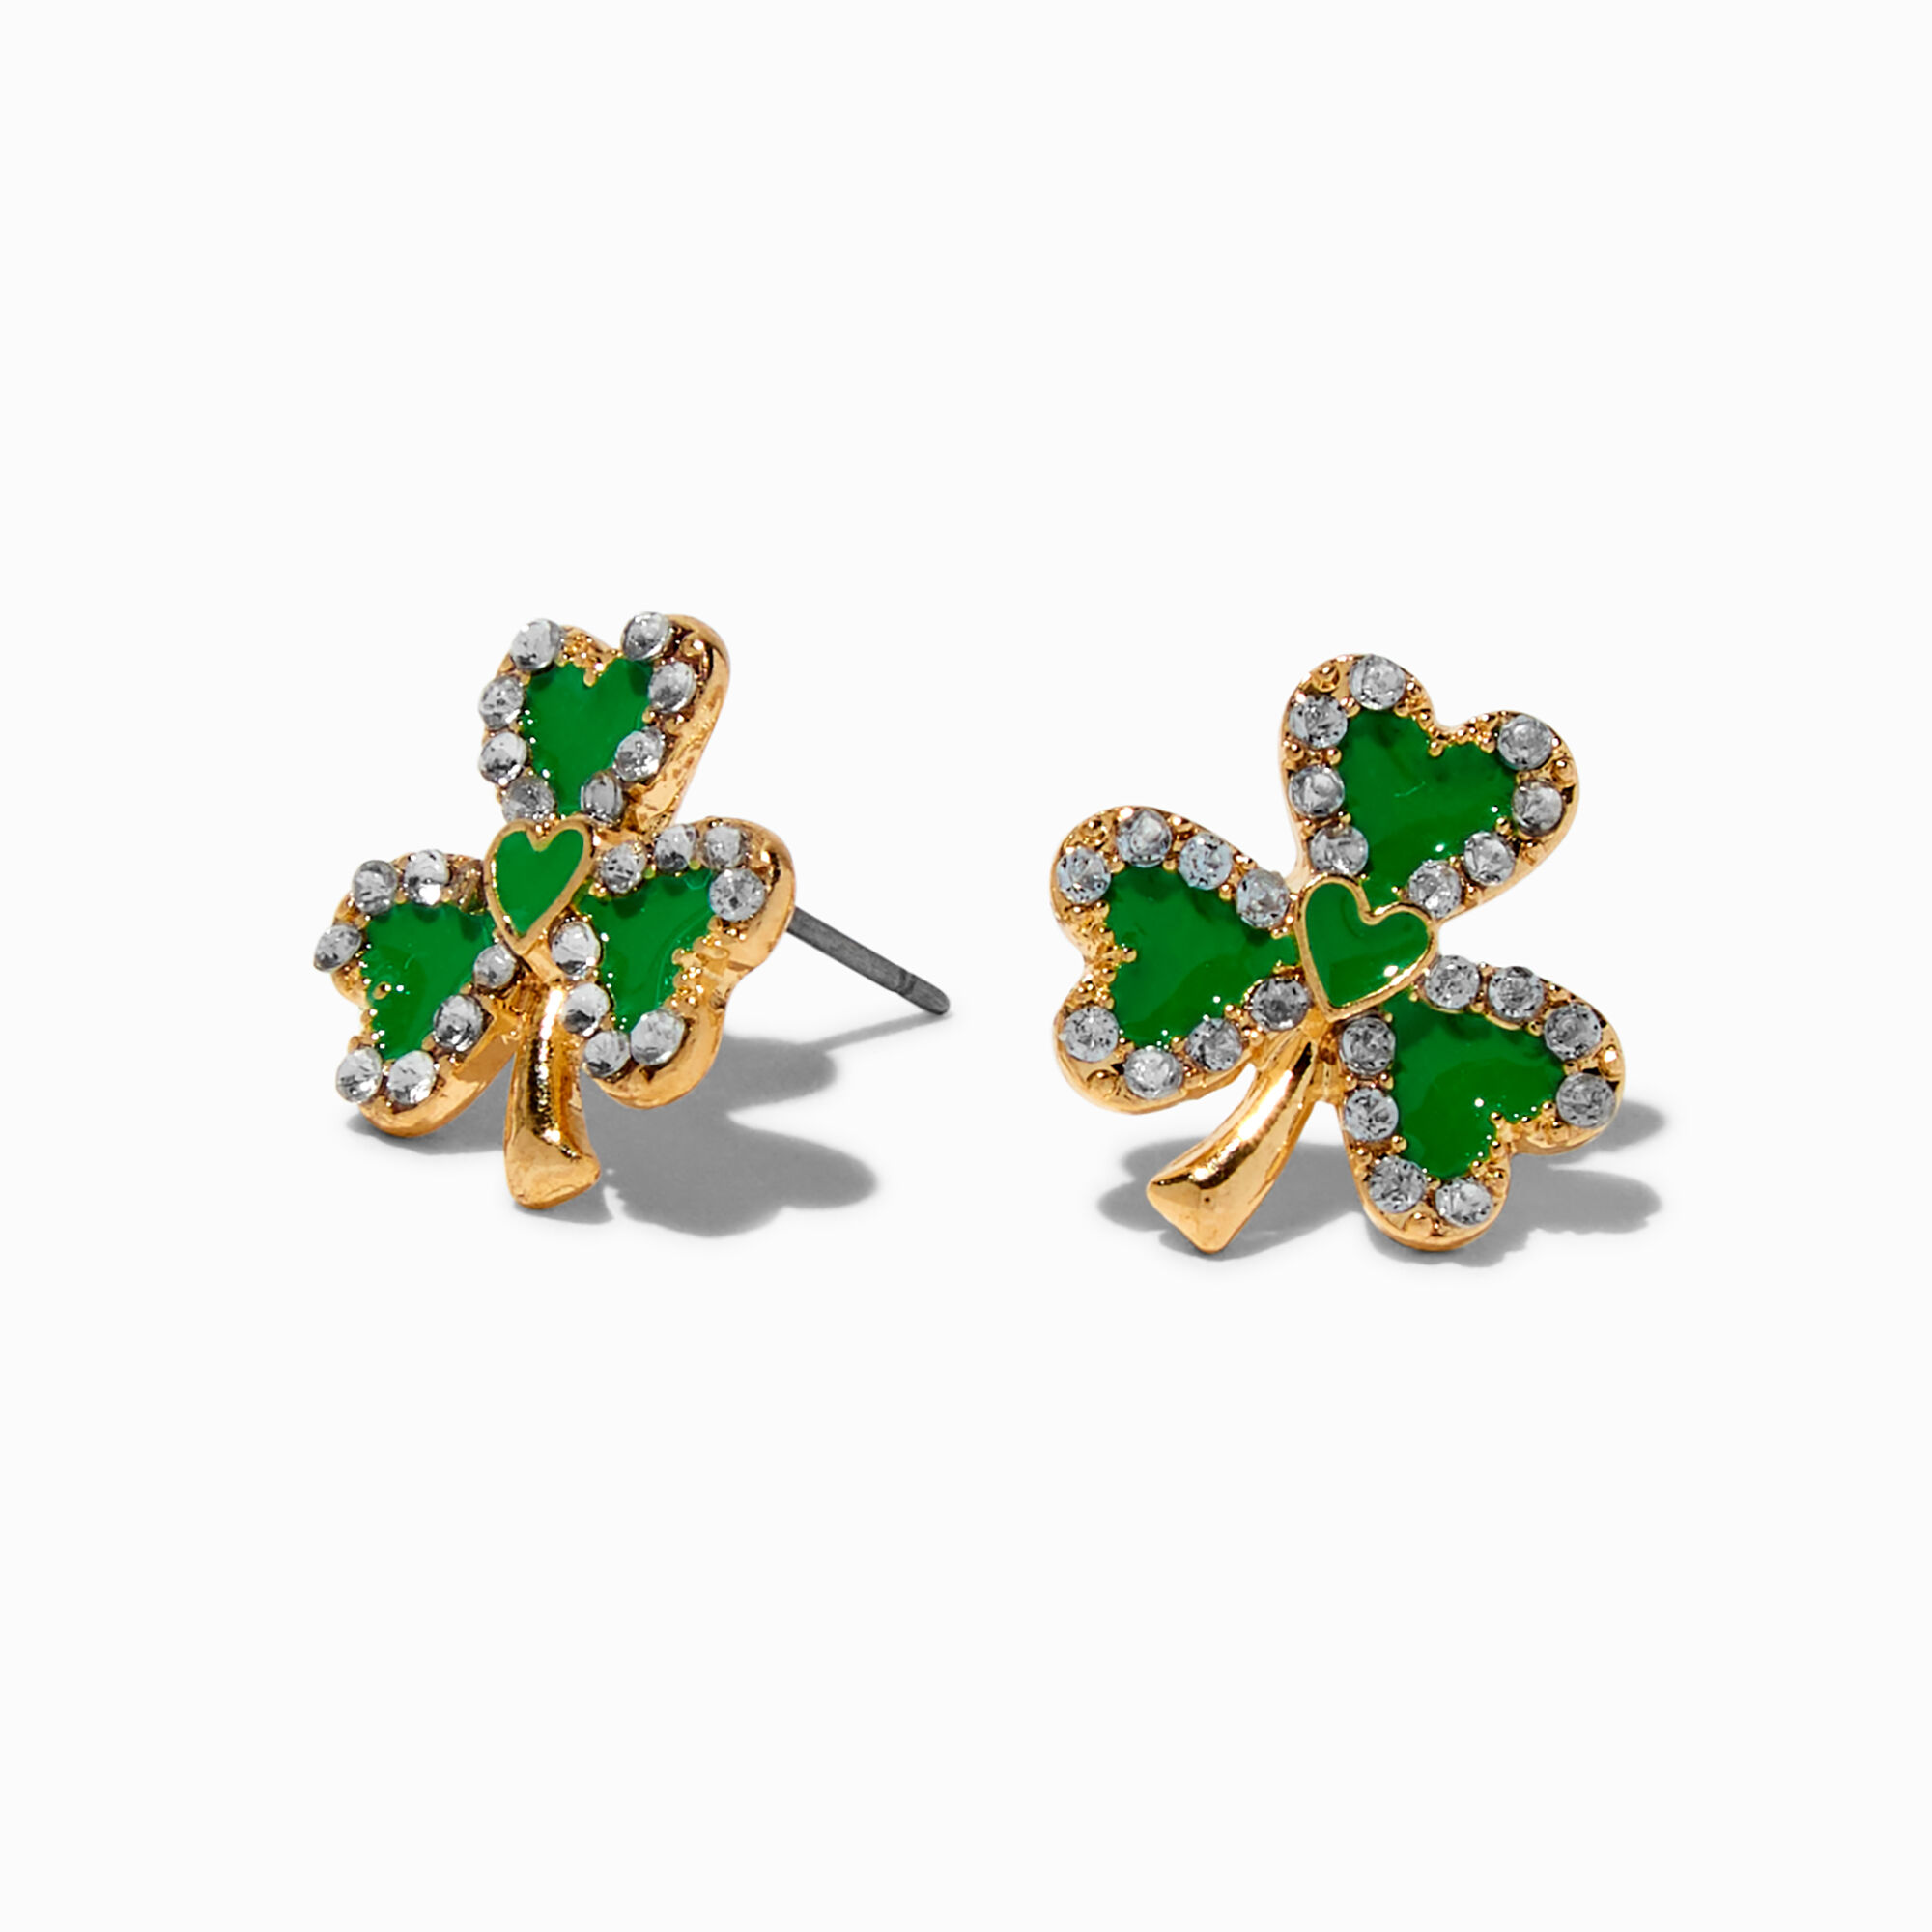 View Claires CrystalFramed Shamrock Stud Earrings Green information